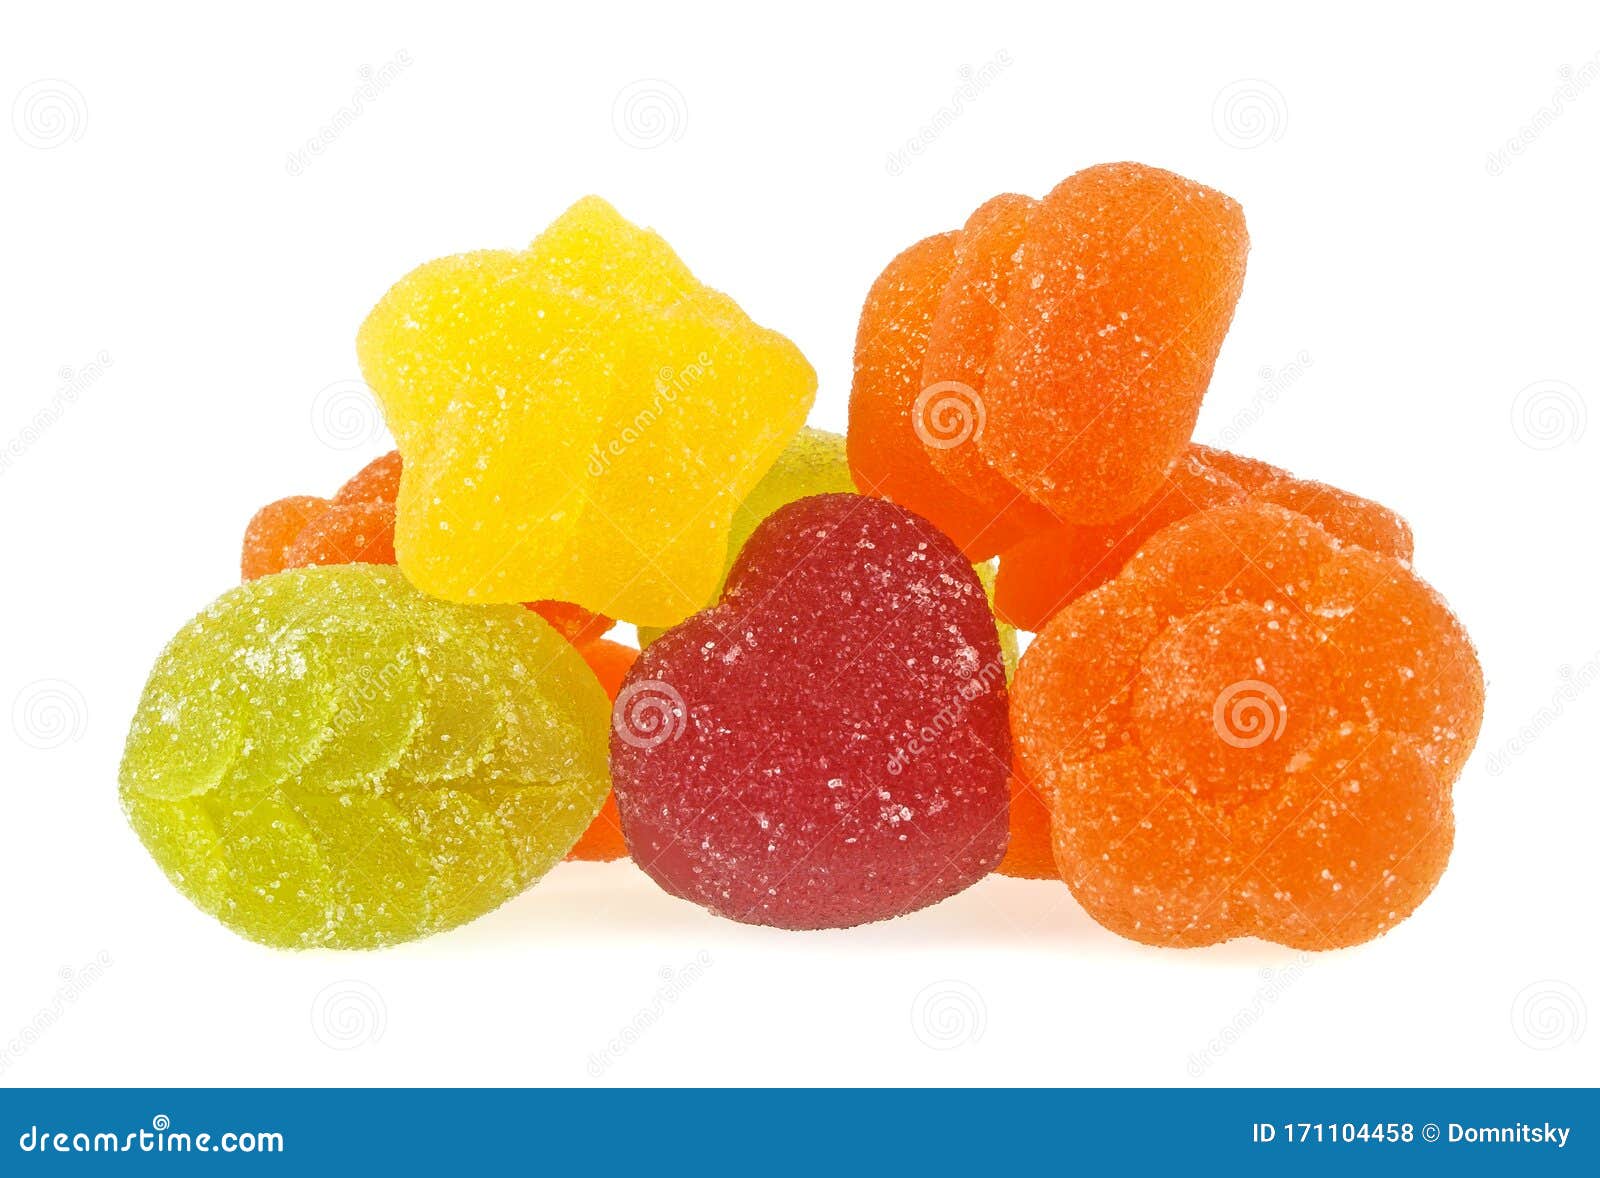 Sugar Candies on White Background Stock Photo - Image of meal, gelatin: 171104458